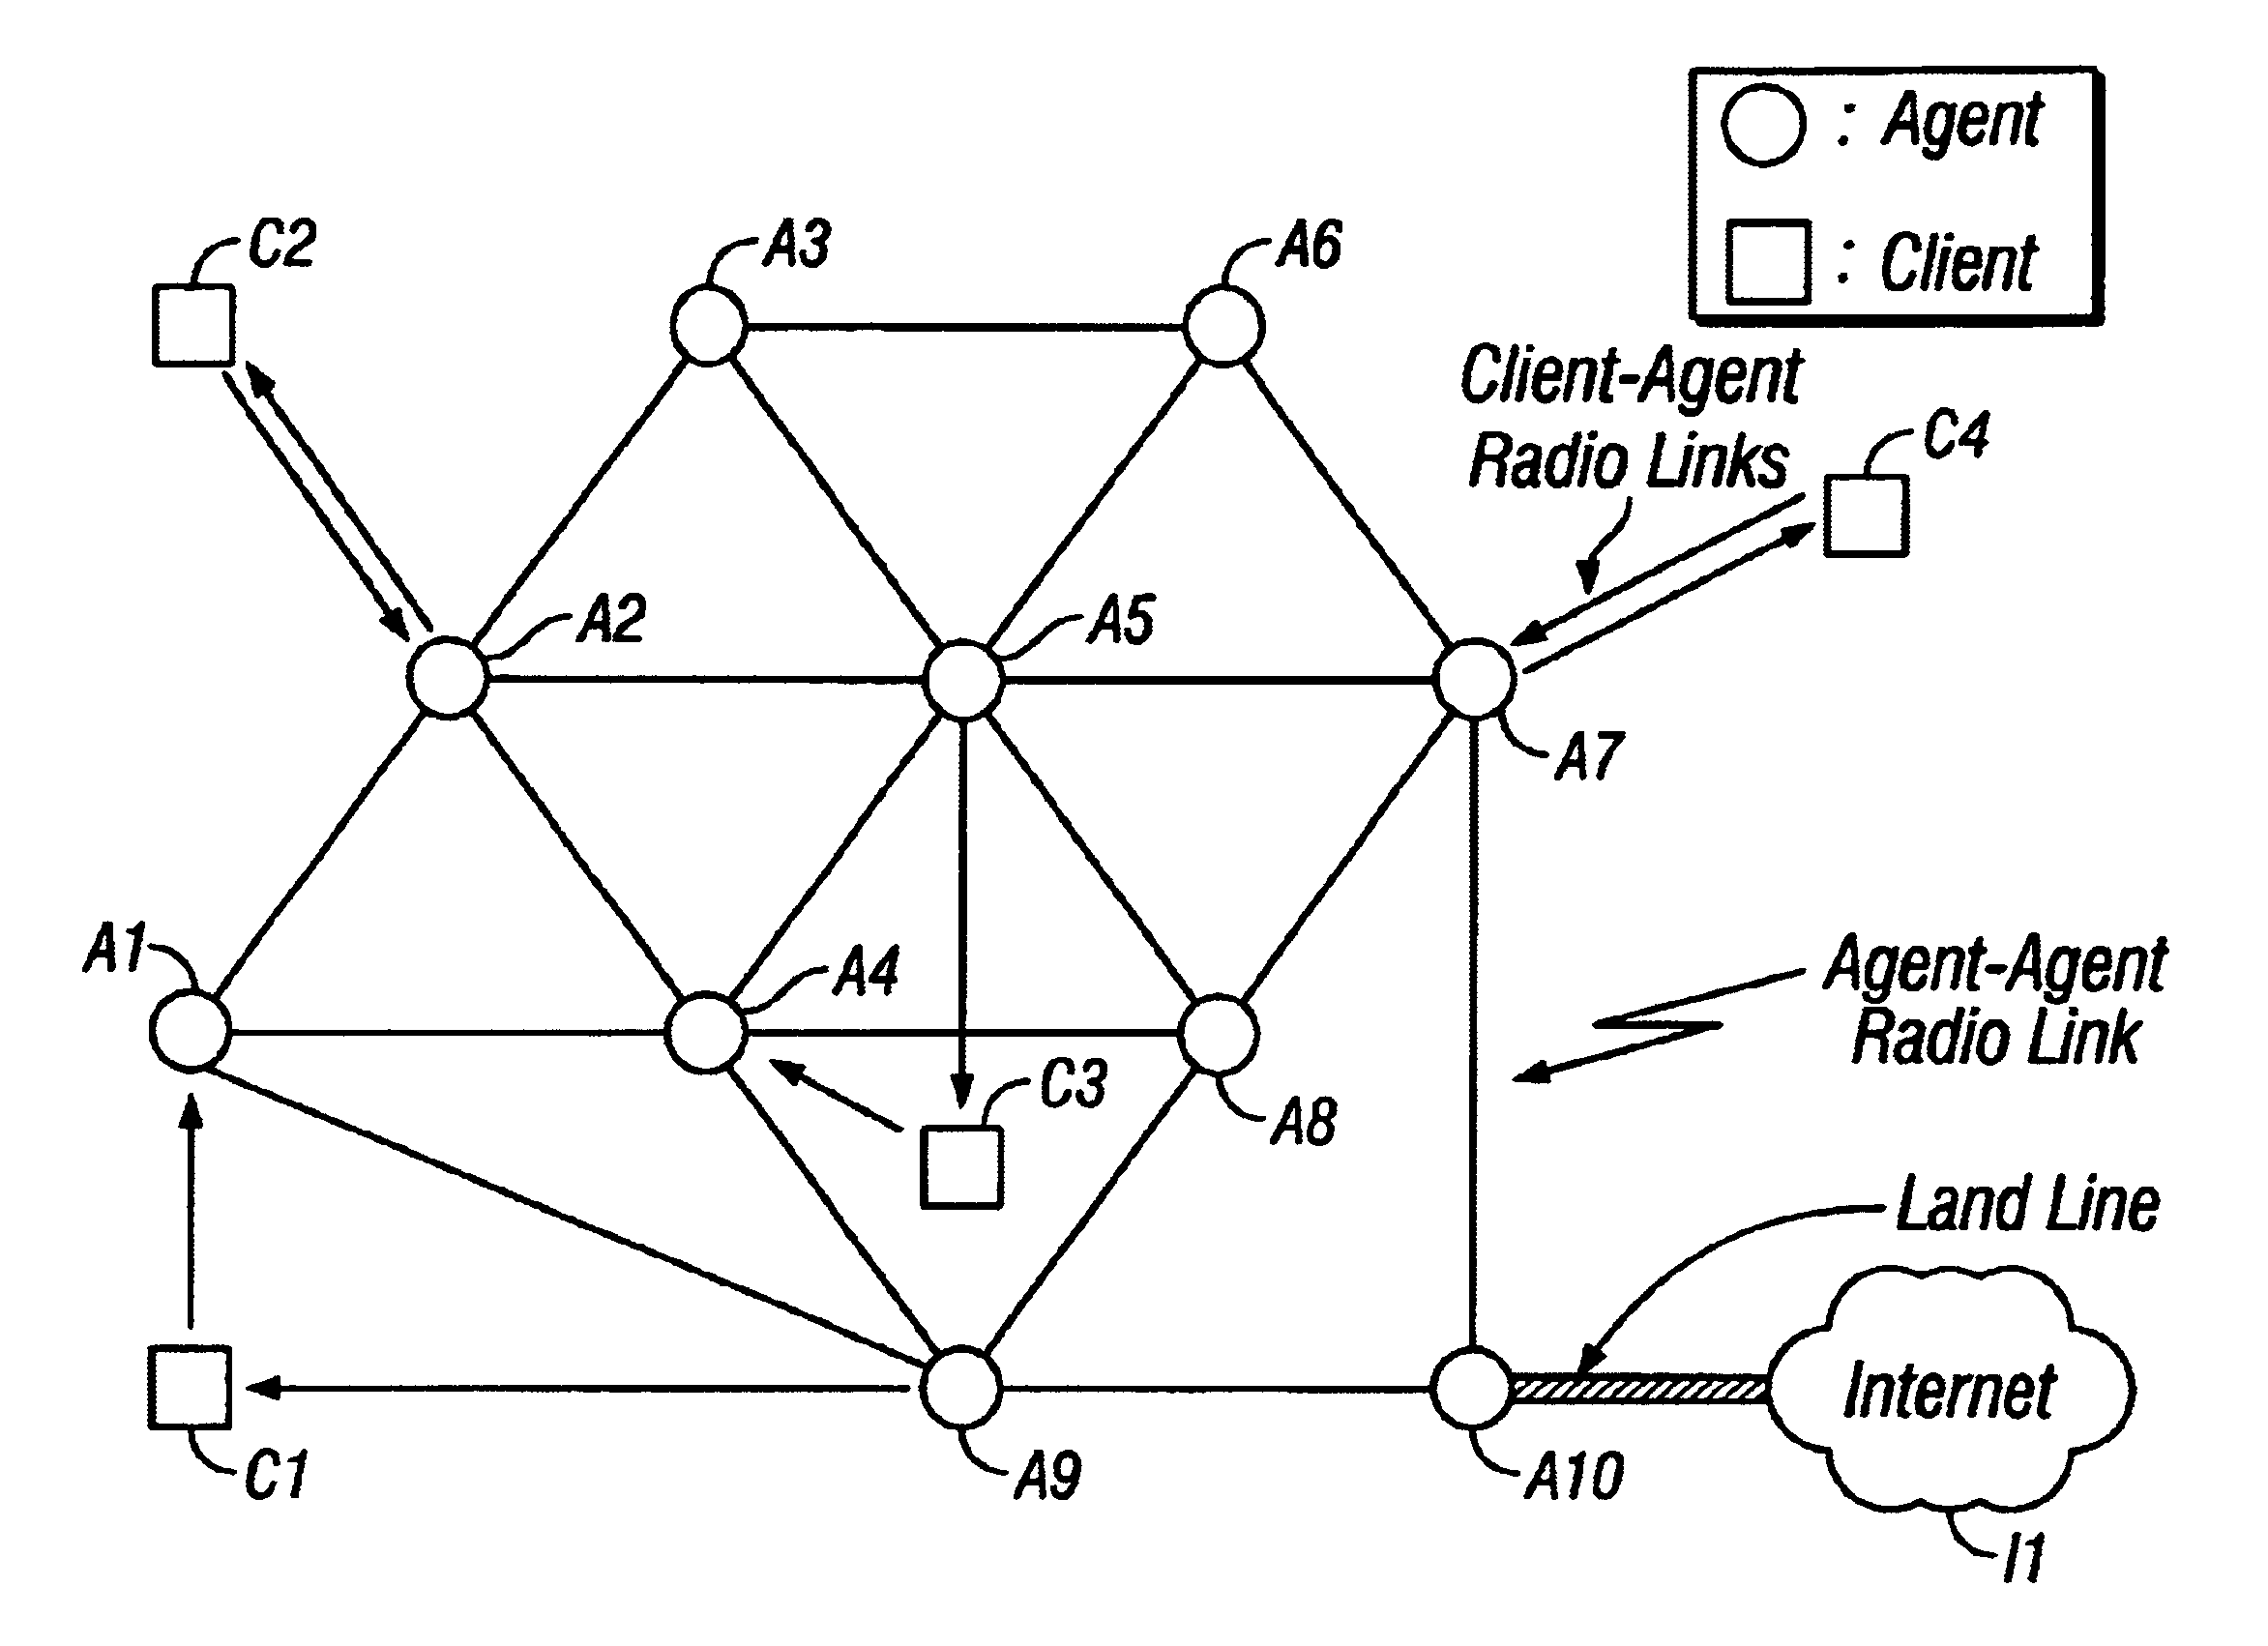 Power- and bandwidth-adaptive in-home wireless communications system with power-grid-powered agents and battery-powered clients